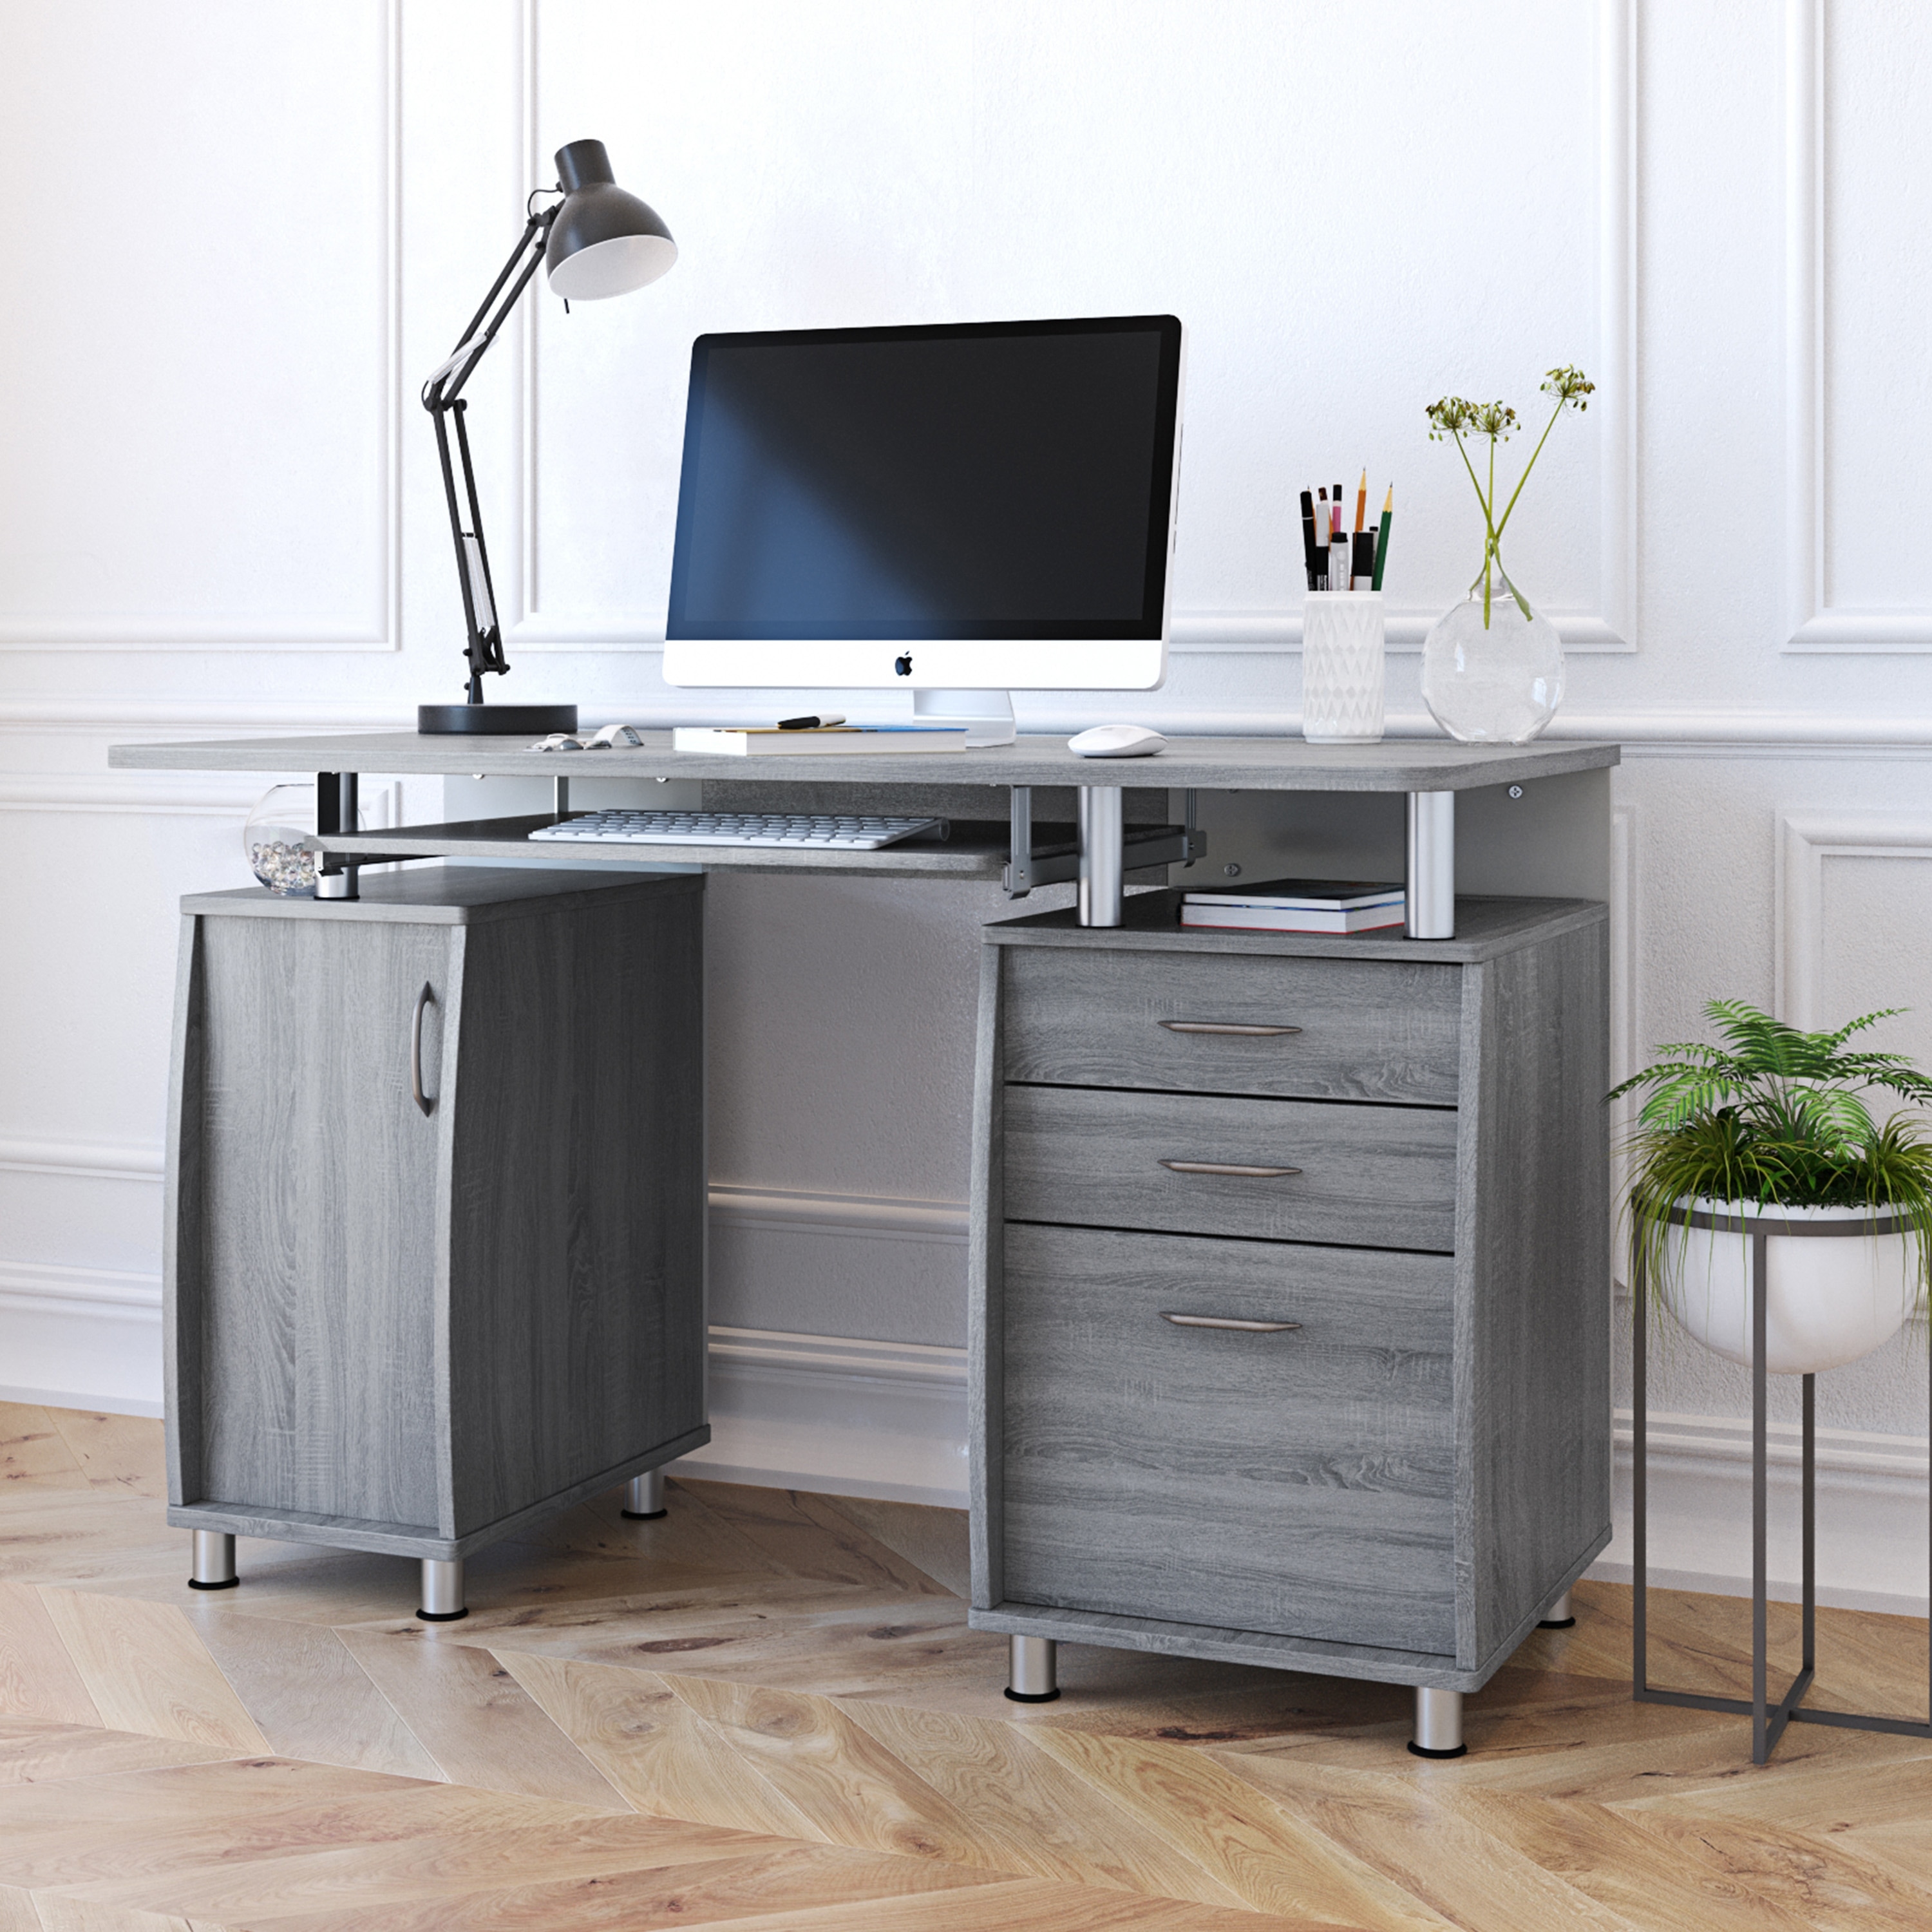 https://ak1.ostkcdn.com/images/products/is/images/direct/74b03e59aa901a2d9765dd598d2a04826cc45db7/Complete-Workstation-Computer-Desk-with-Storage%2CThere%27s-Plenty-of-Space%2CWith-an-Accessory-Rack%2C-two-Drawers-and-a-Filing-Cabinet.jpg